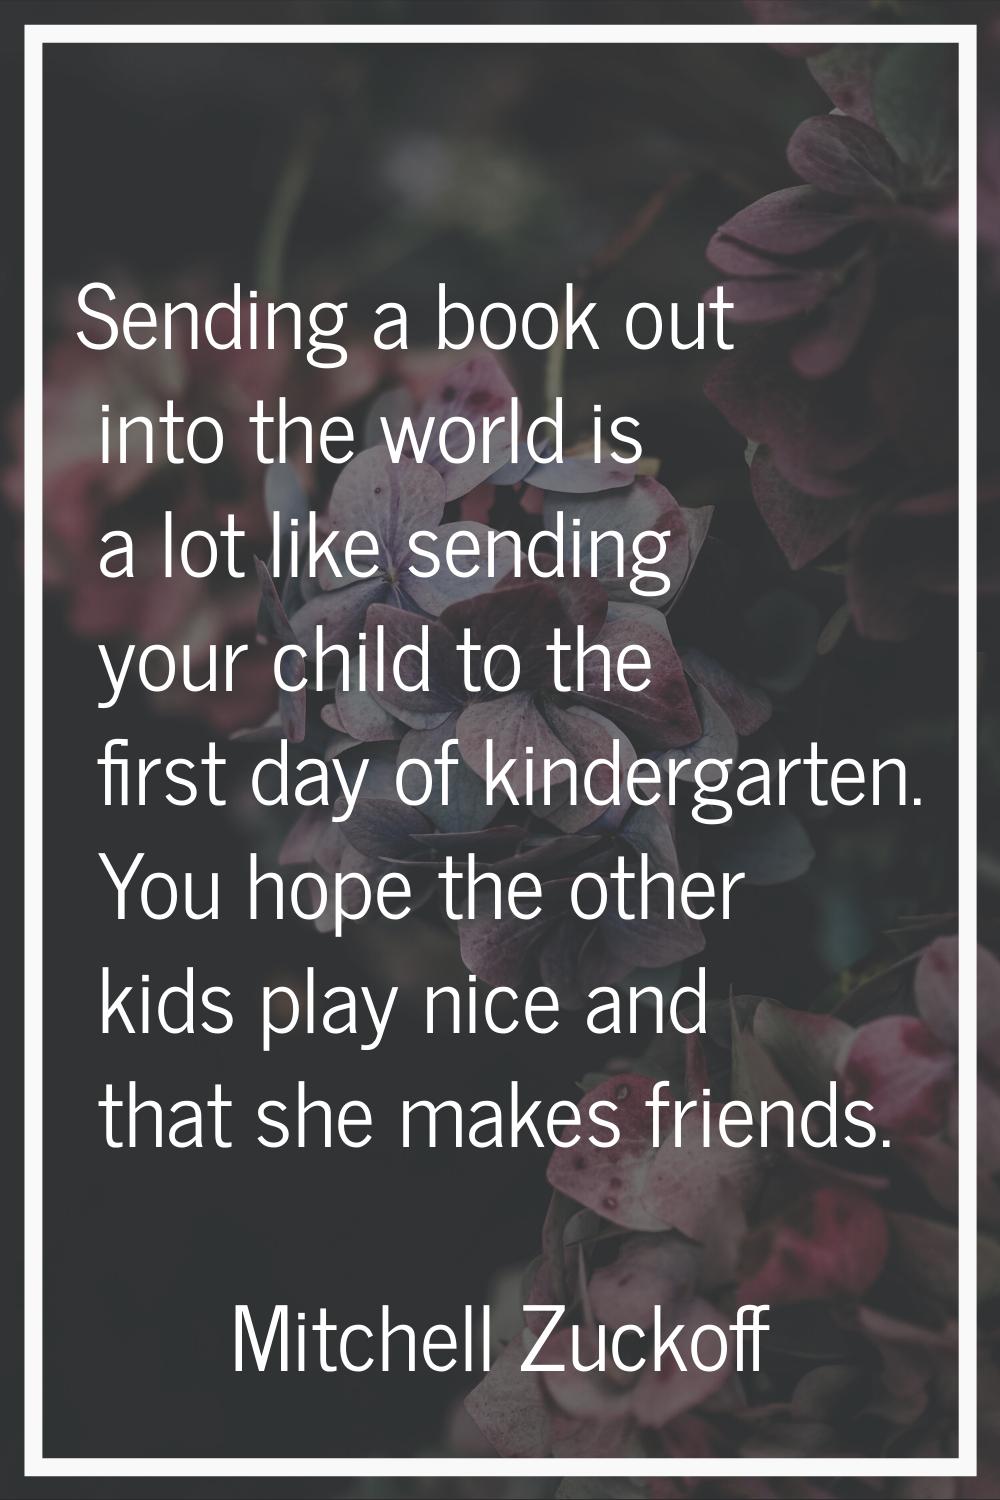 Sending a book out into the world is a lot like sending your child to the first day of kindergarten